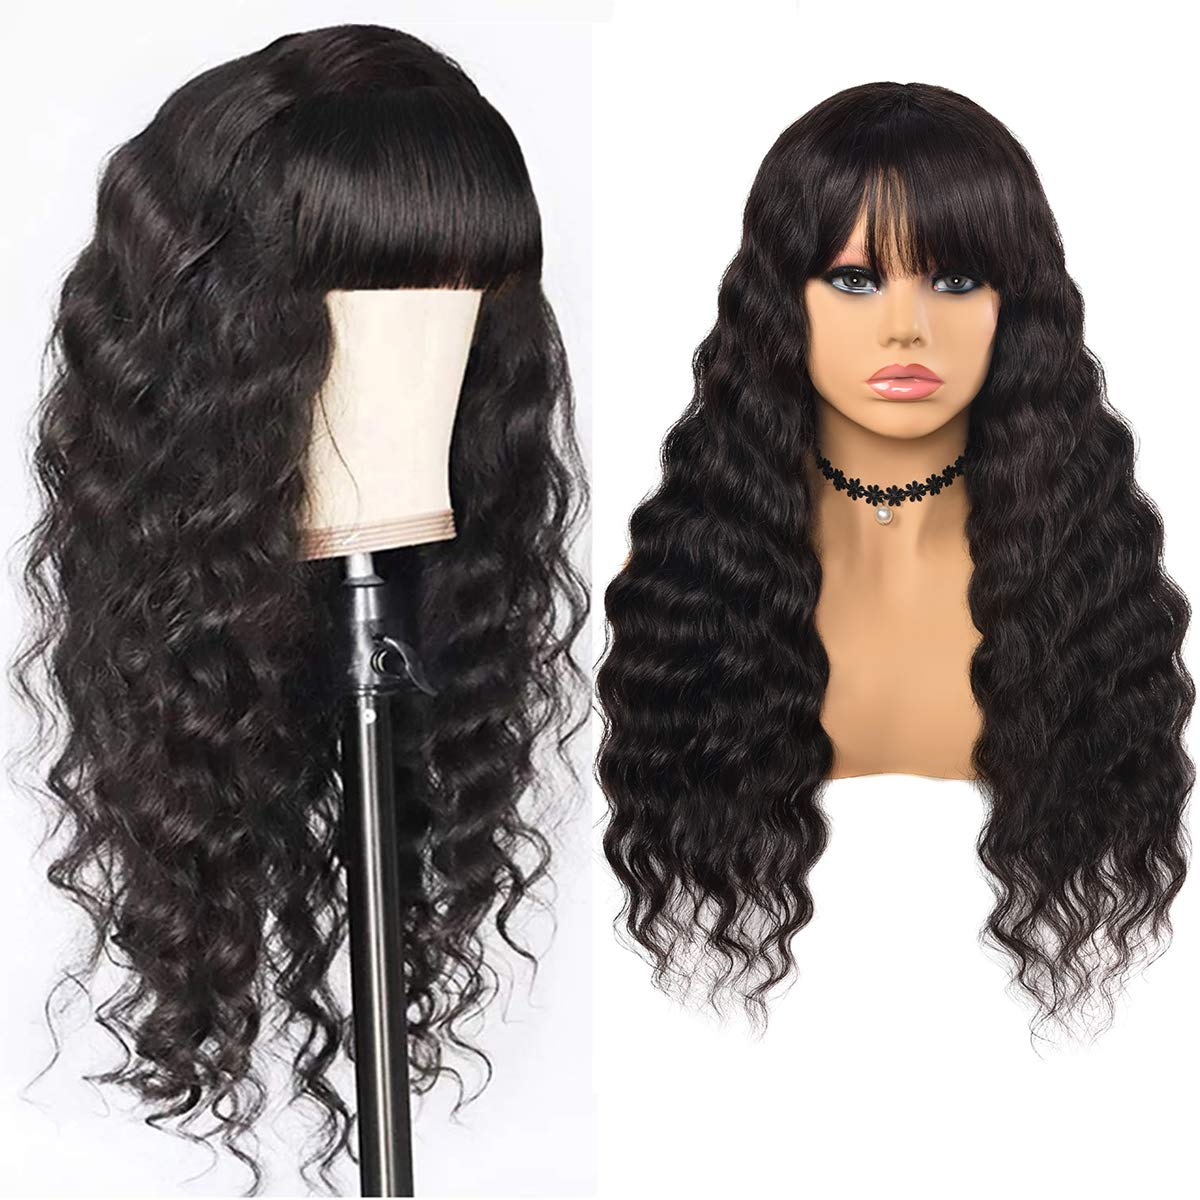 Gluna Hair Loose Deep Wave Wigs With Bangs 150% Density None Lace Human Hair Wigs Glueless Machine Made Wigs for Black Women Brazilian Virgin Hair Natural Color